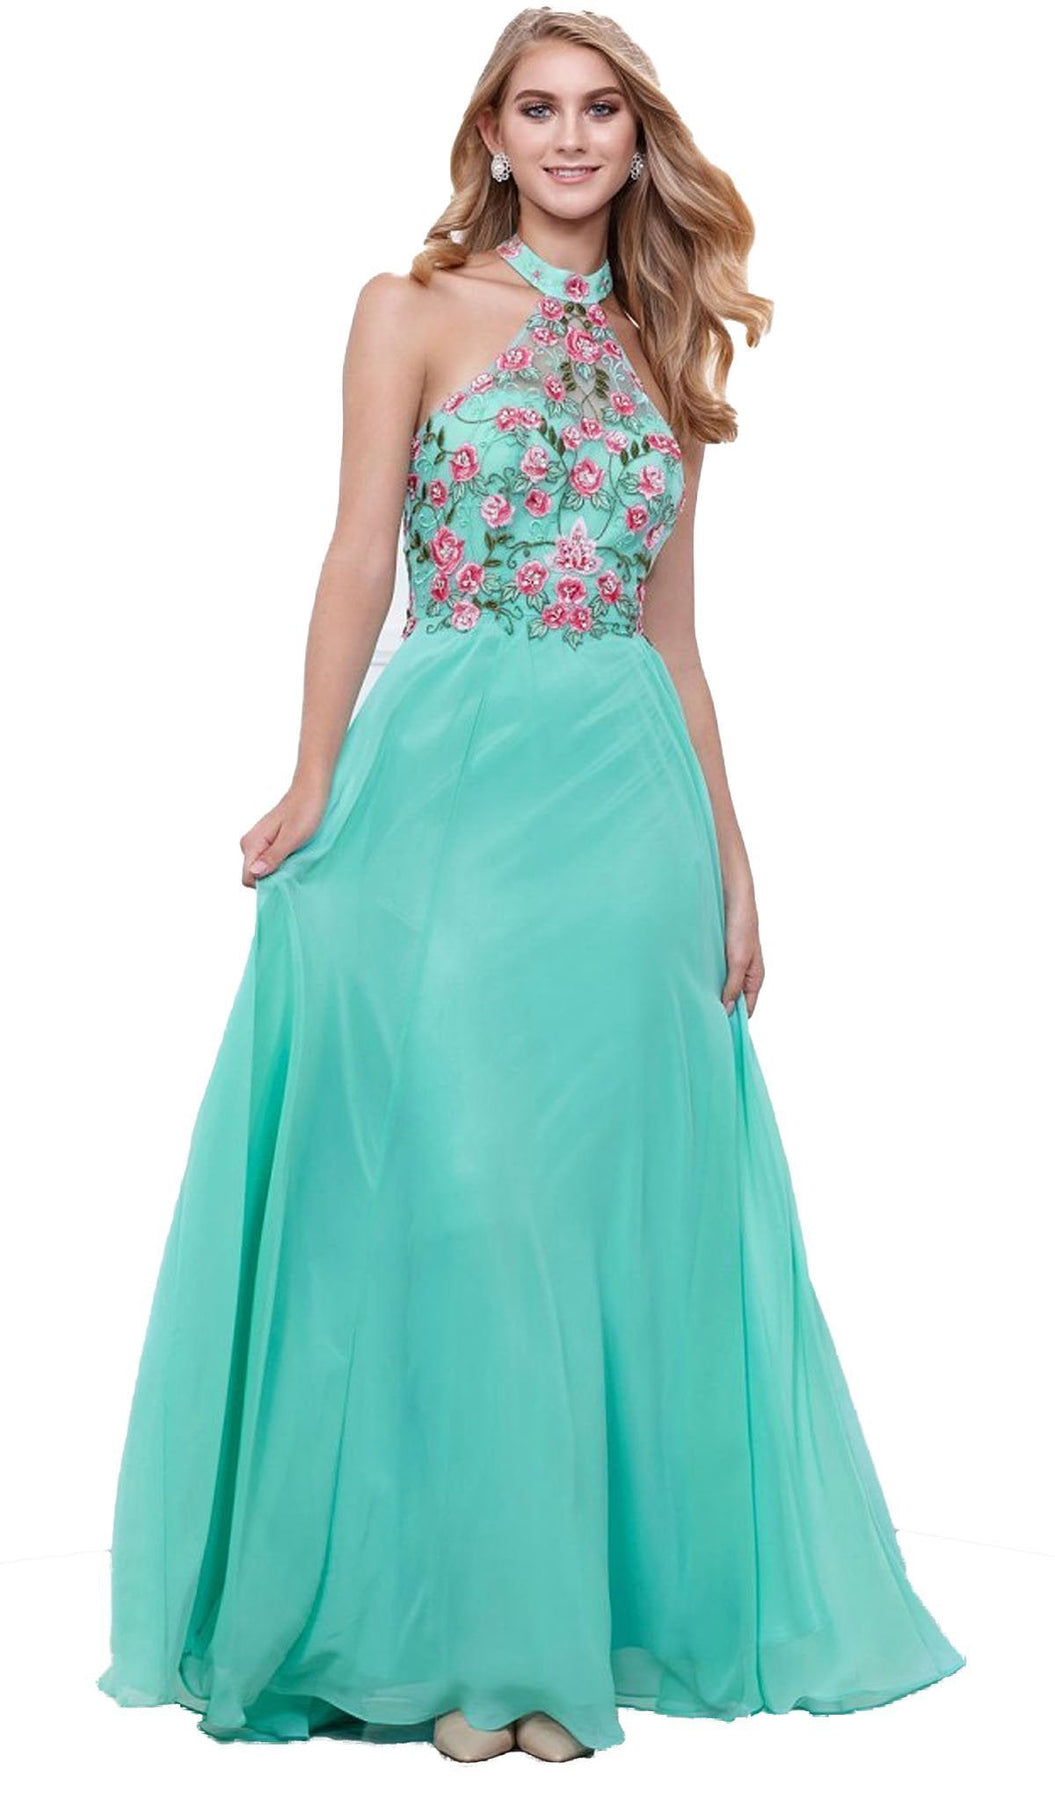 Nox Anabel - 8326 Lovely Floral Halter Style Long Evening Gown Special Occasion Dress XS / Mint Green